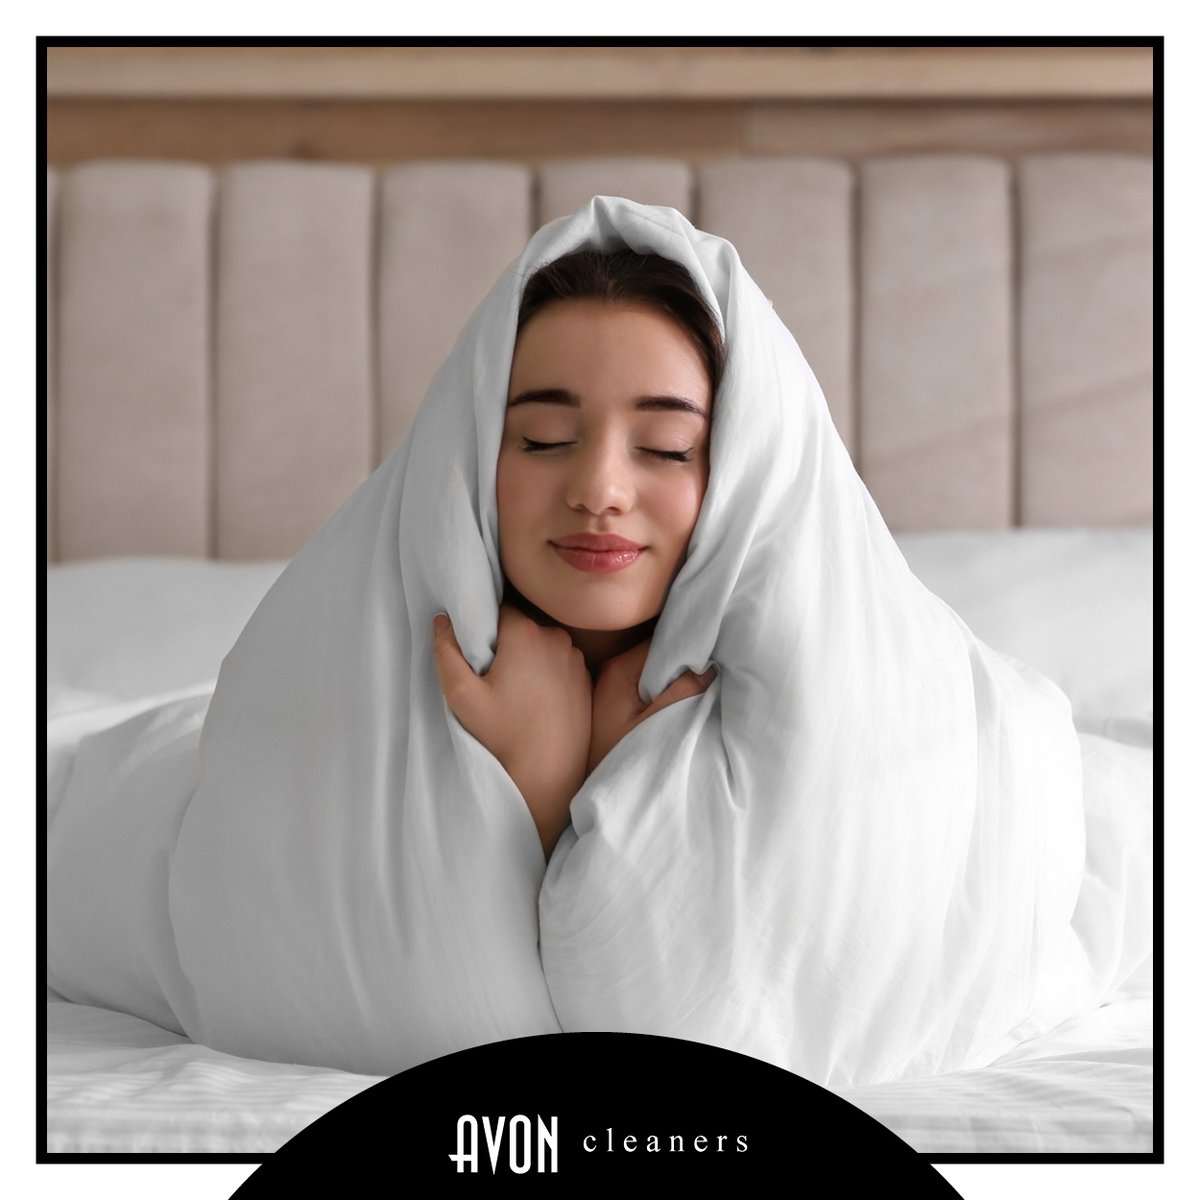 Spend a little extra time enjoying you bed this morning, and skip laundry day! 🛏️✨ Leave it to the pros to do your laundry for you - Avon Cleaners! #ProfessionalDryCleaning #StayInBed #Relax #EnjoyYourself